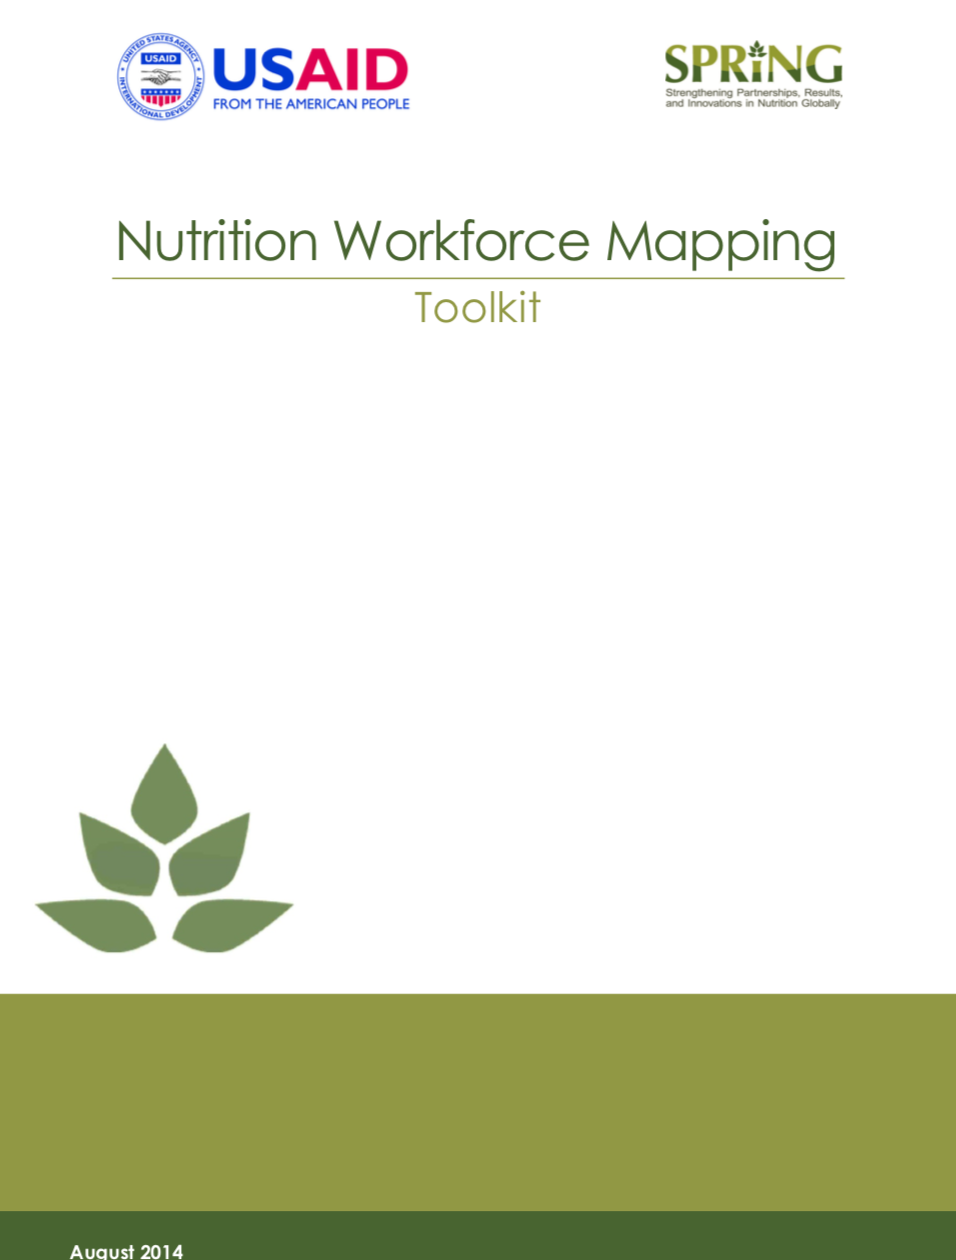 Photo: SPRING_Nutrition Workforce Mapping Toolkit_8.2014 cover